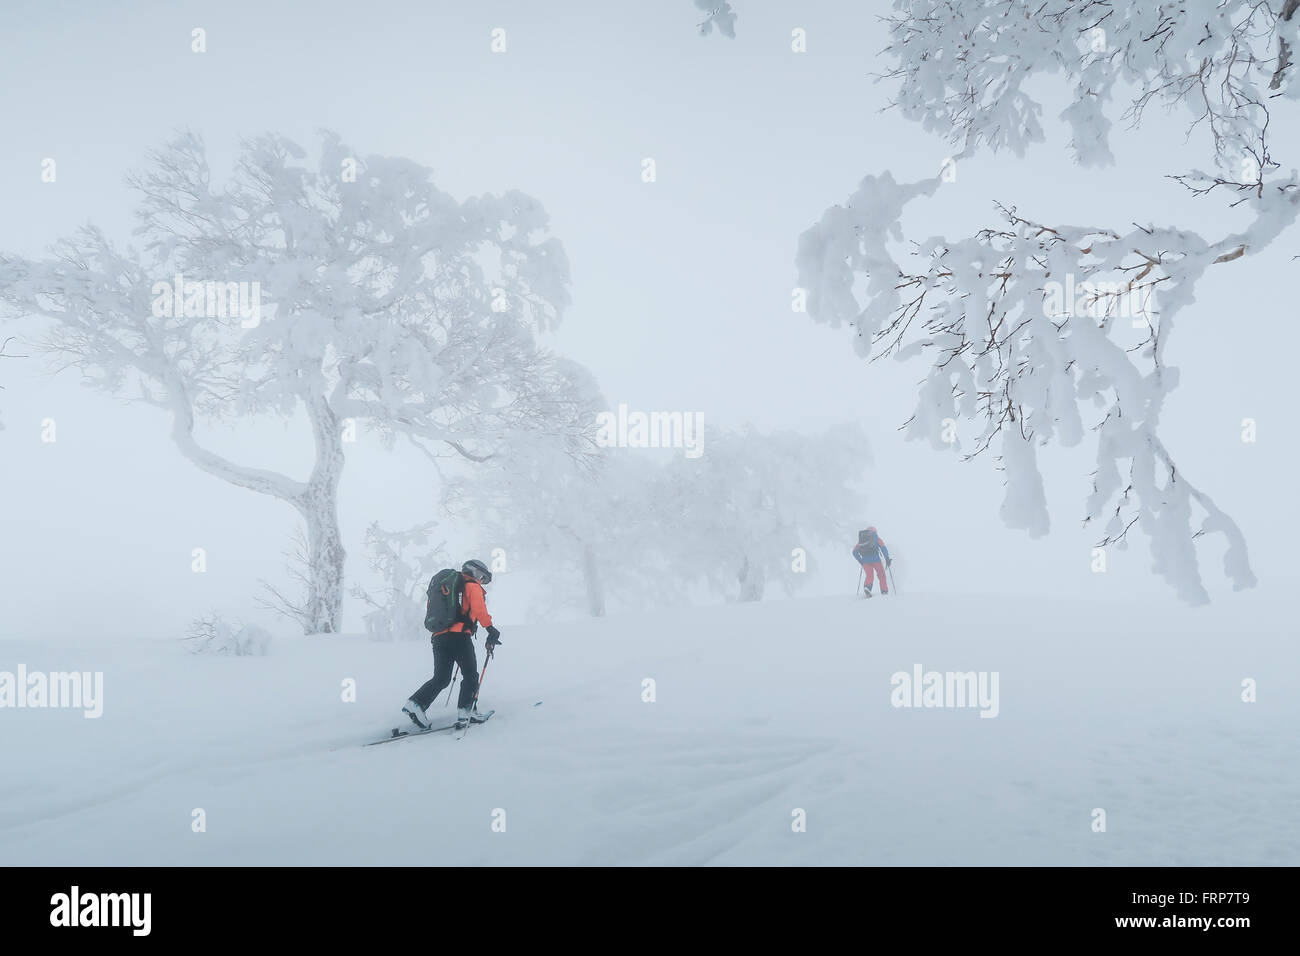 Two backcountry skiers are hiking through a misty mountain landscape with snow covered trees near the ski resort of Kiroro on Hokaido, Japan. Stock Photo